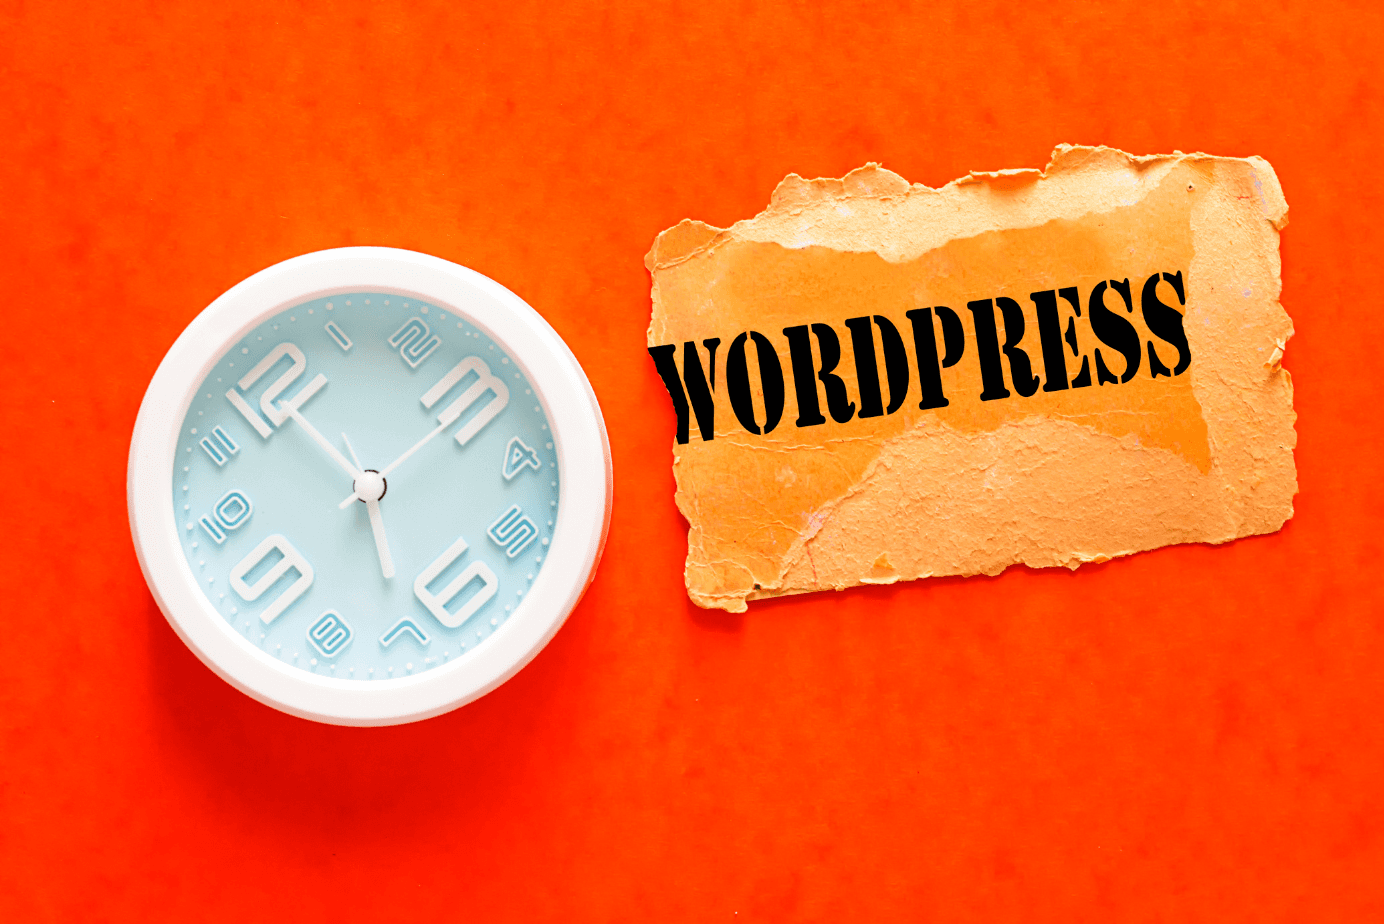 Wordpresspagesvsposts4 E716a668b37df2959390d71840a827cc 2000 WordPress Pages vs Posts: What You Need to Know for SEO Success